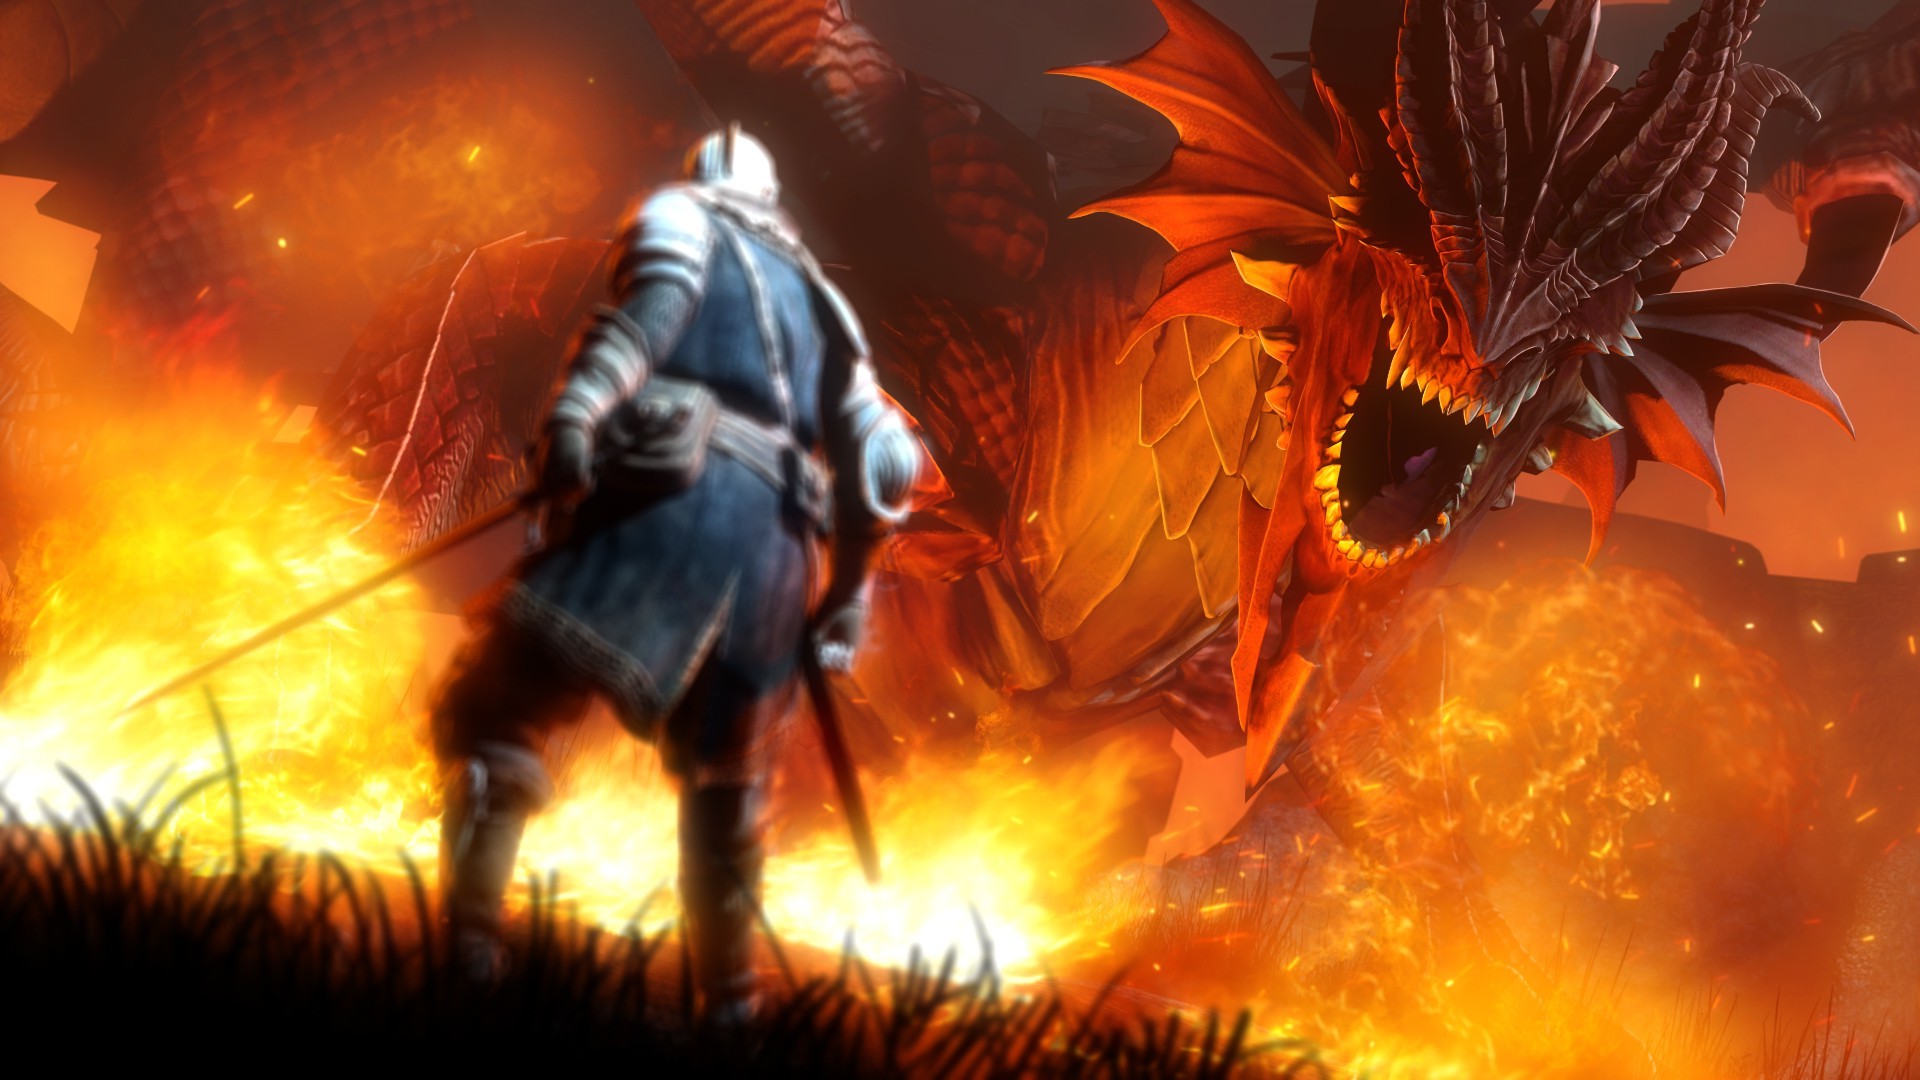 hd wallpaper for mobile 1920x1080 download,action adventure game,demon,pc game,dragon,strategy video game